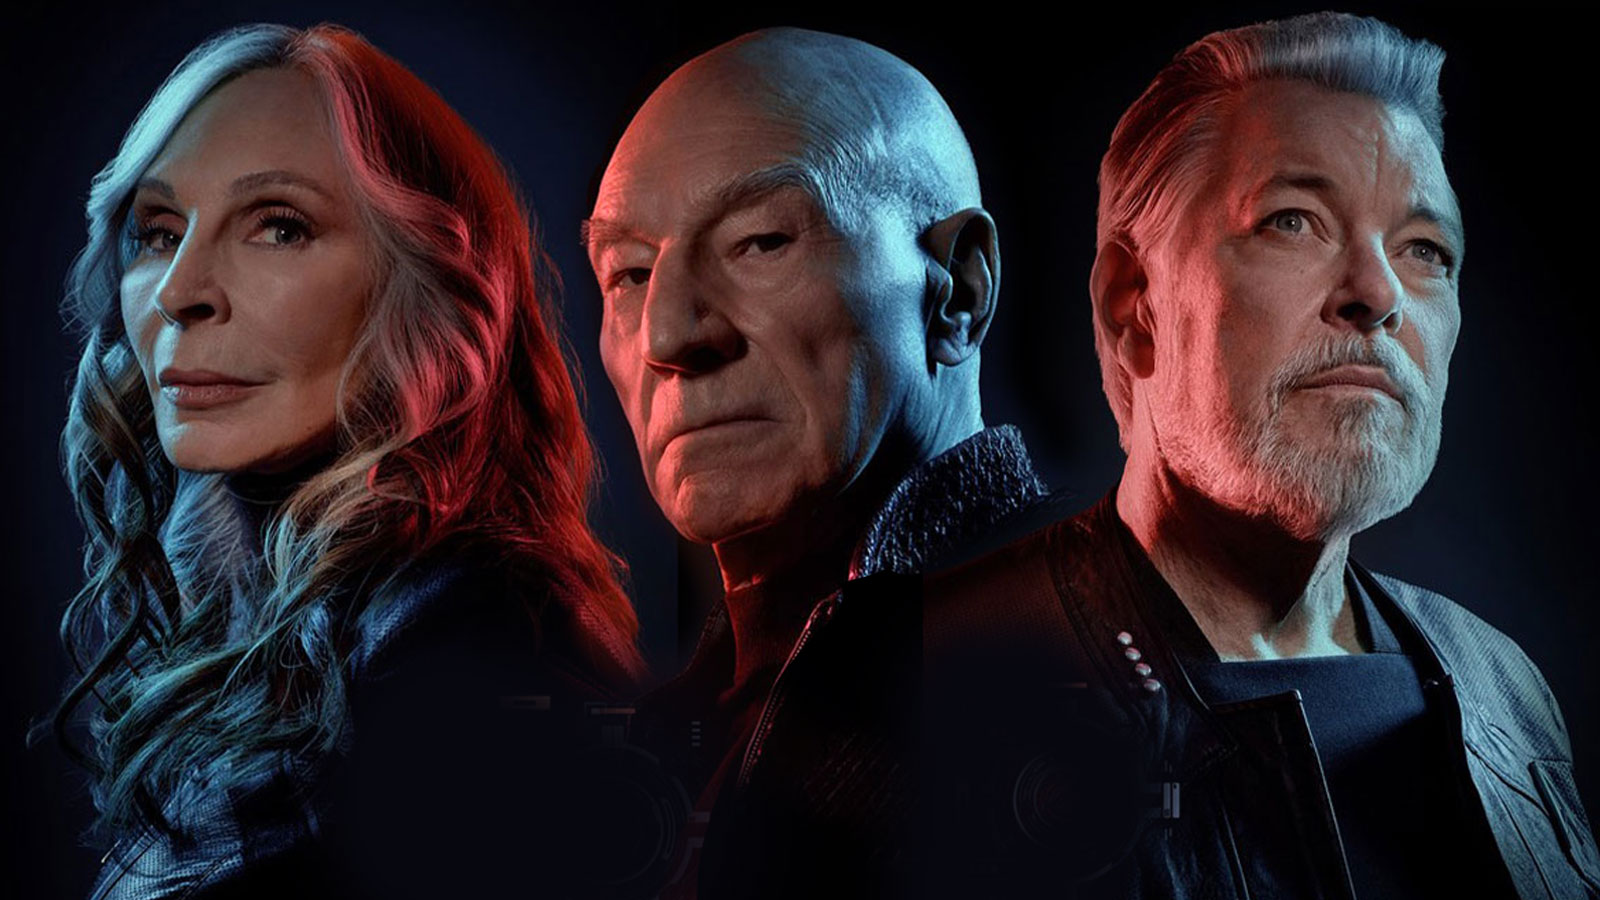 Star Trek: Picard Season 3 premiere "The Next Generation" Review: The cast of TNG is back... and we're here for it